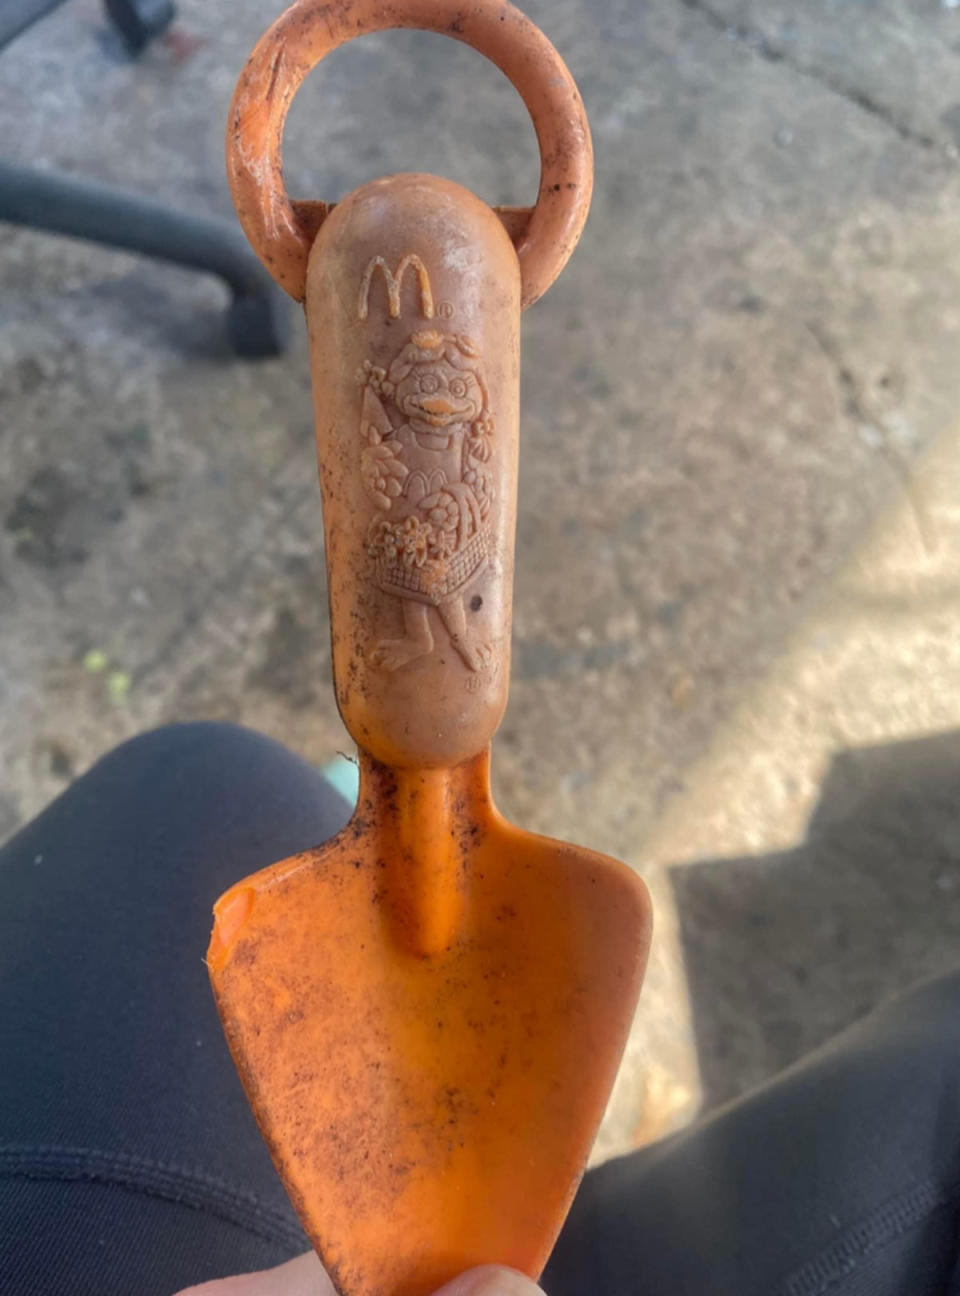 An old Happy Meal toy from McDonald's was found in a woman's backyard. Source: Facebook